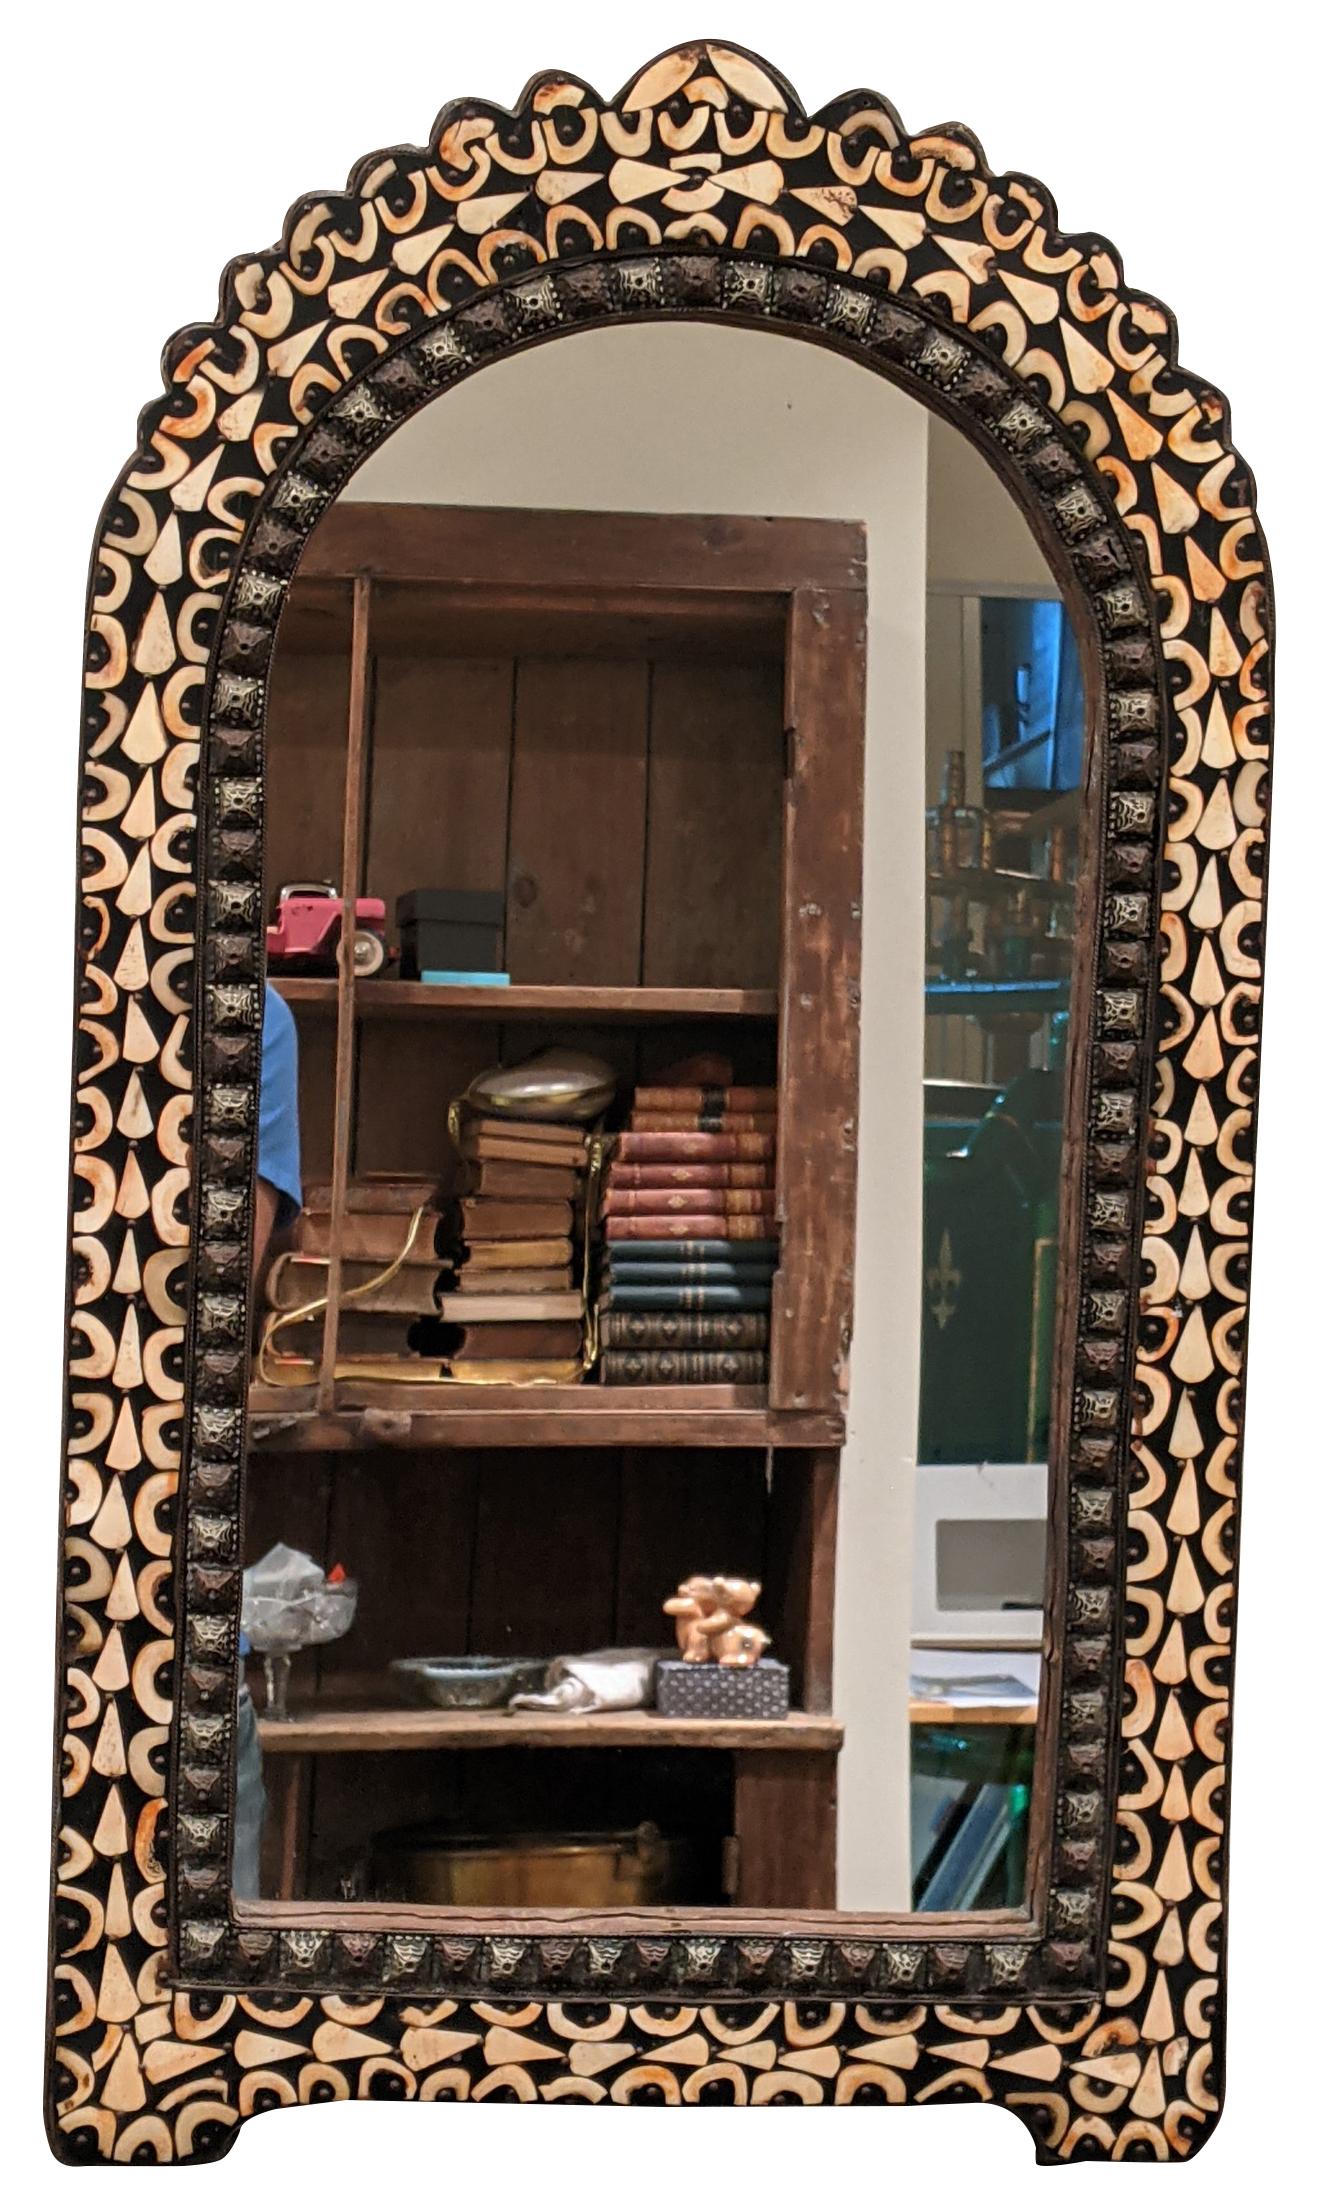 Metal and bone inlay Moroccan wall mirror, shaped like an arched window with a scalloped top edge and a stamped metal border. Marked Tangier 2014 on backside. Measure: 30